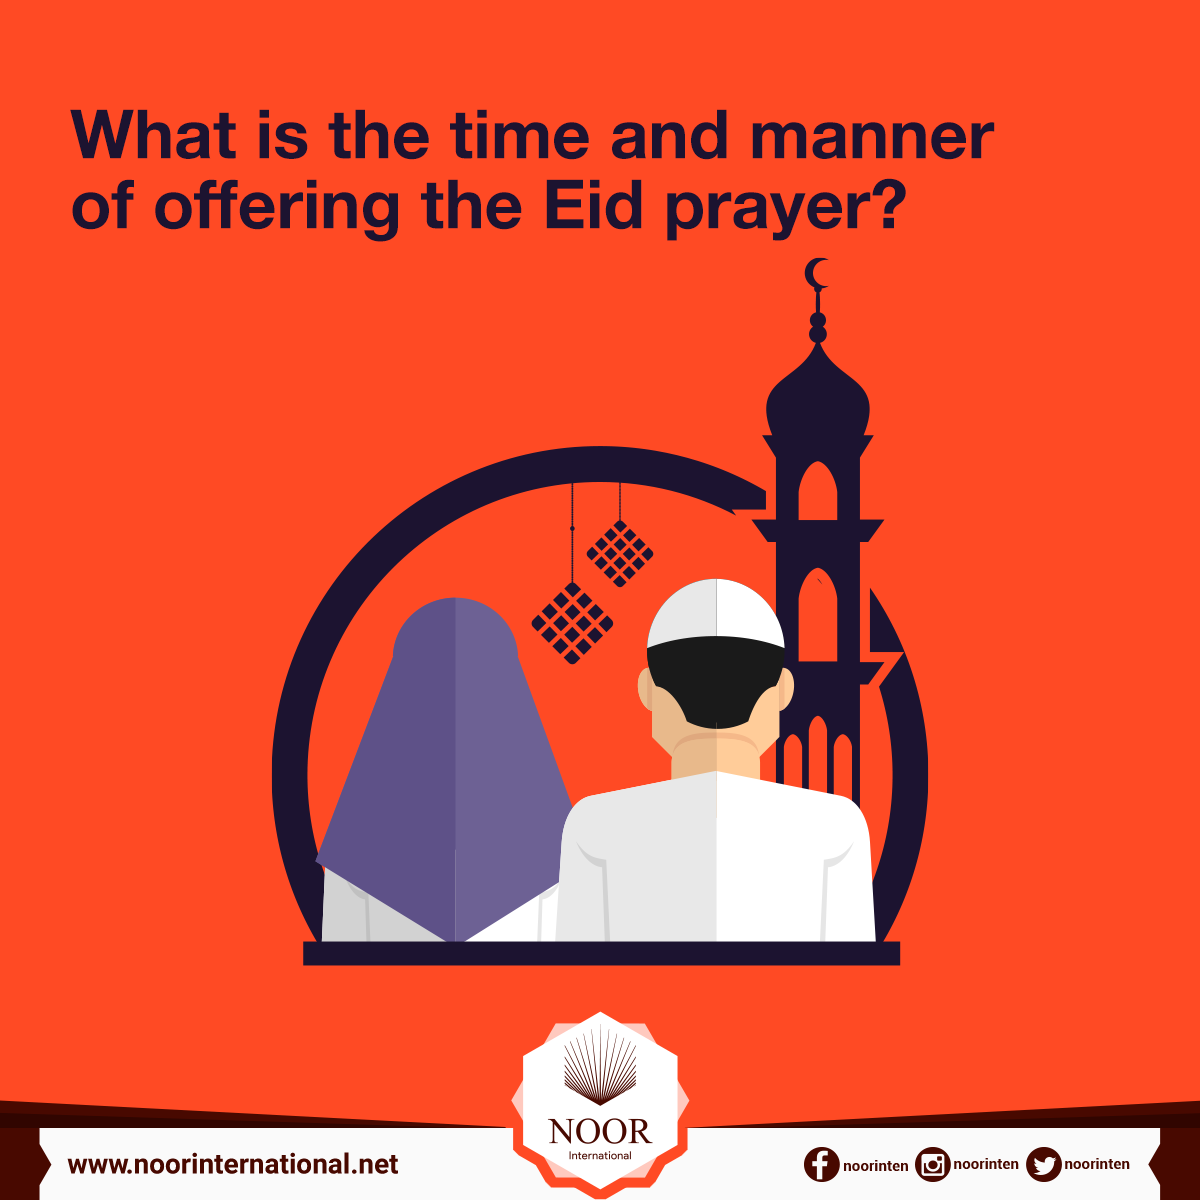 What is the time and manner of offering the Eid prayer?